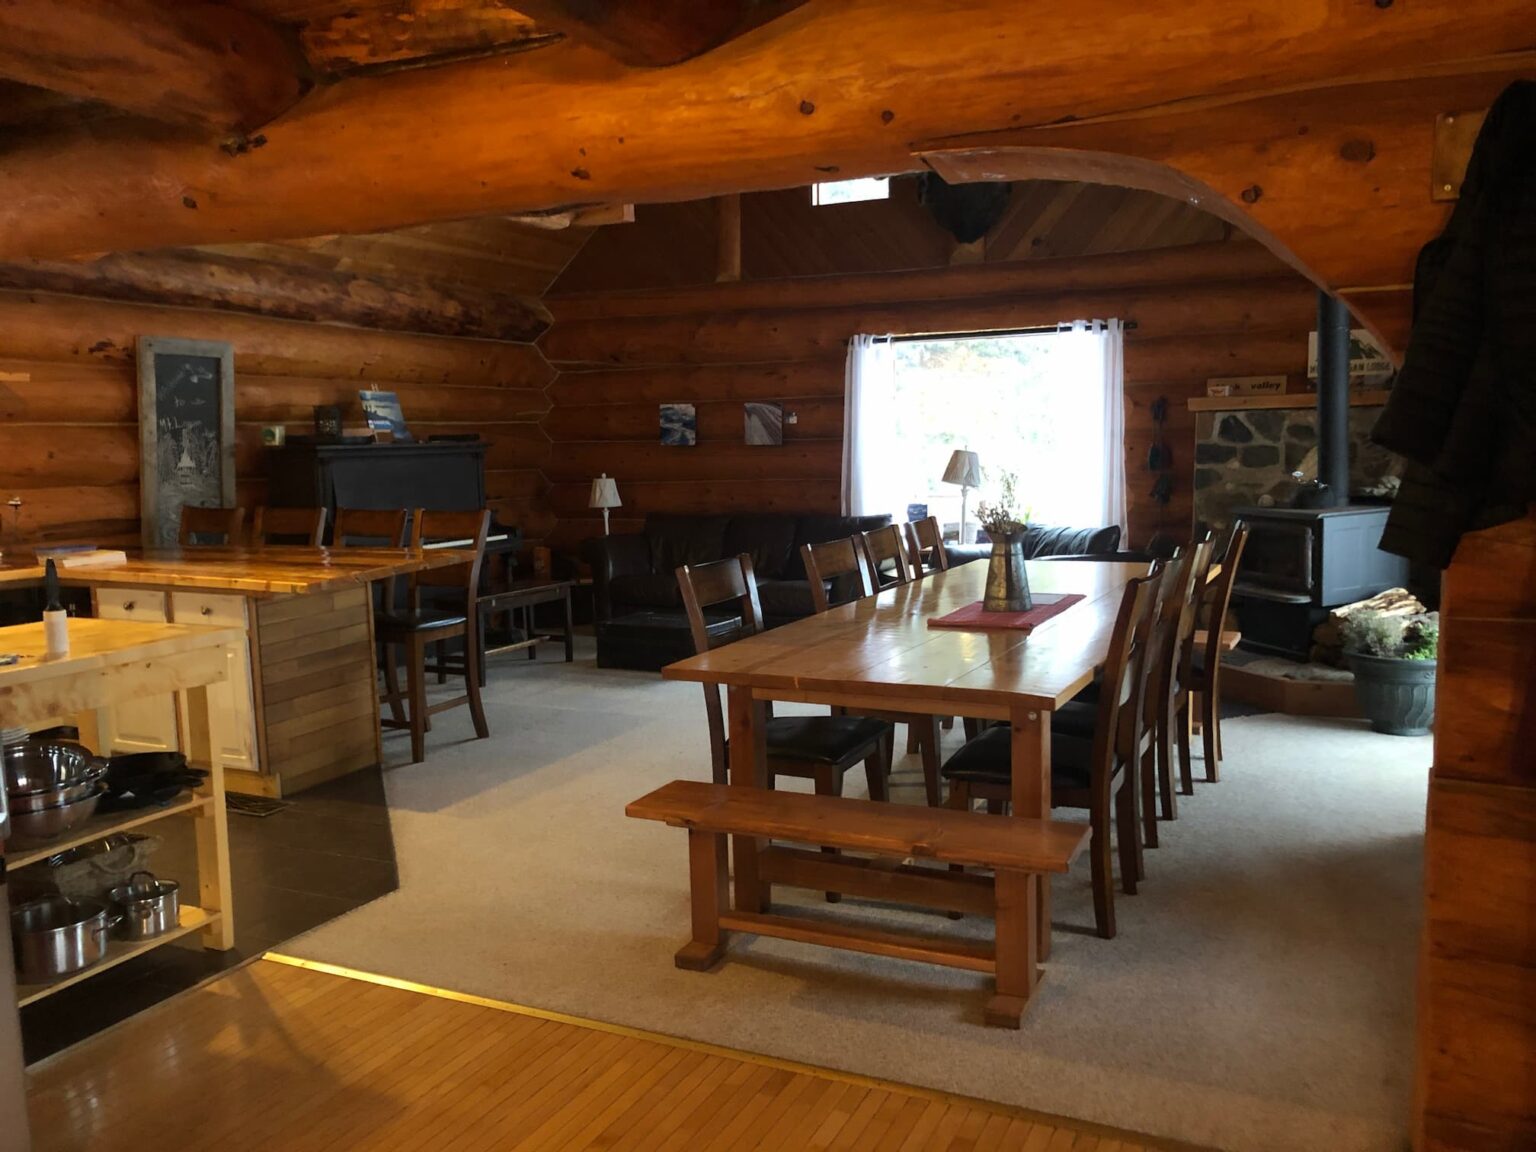 Inside the Lodge dining room